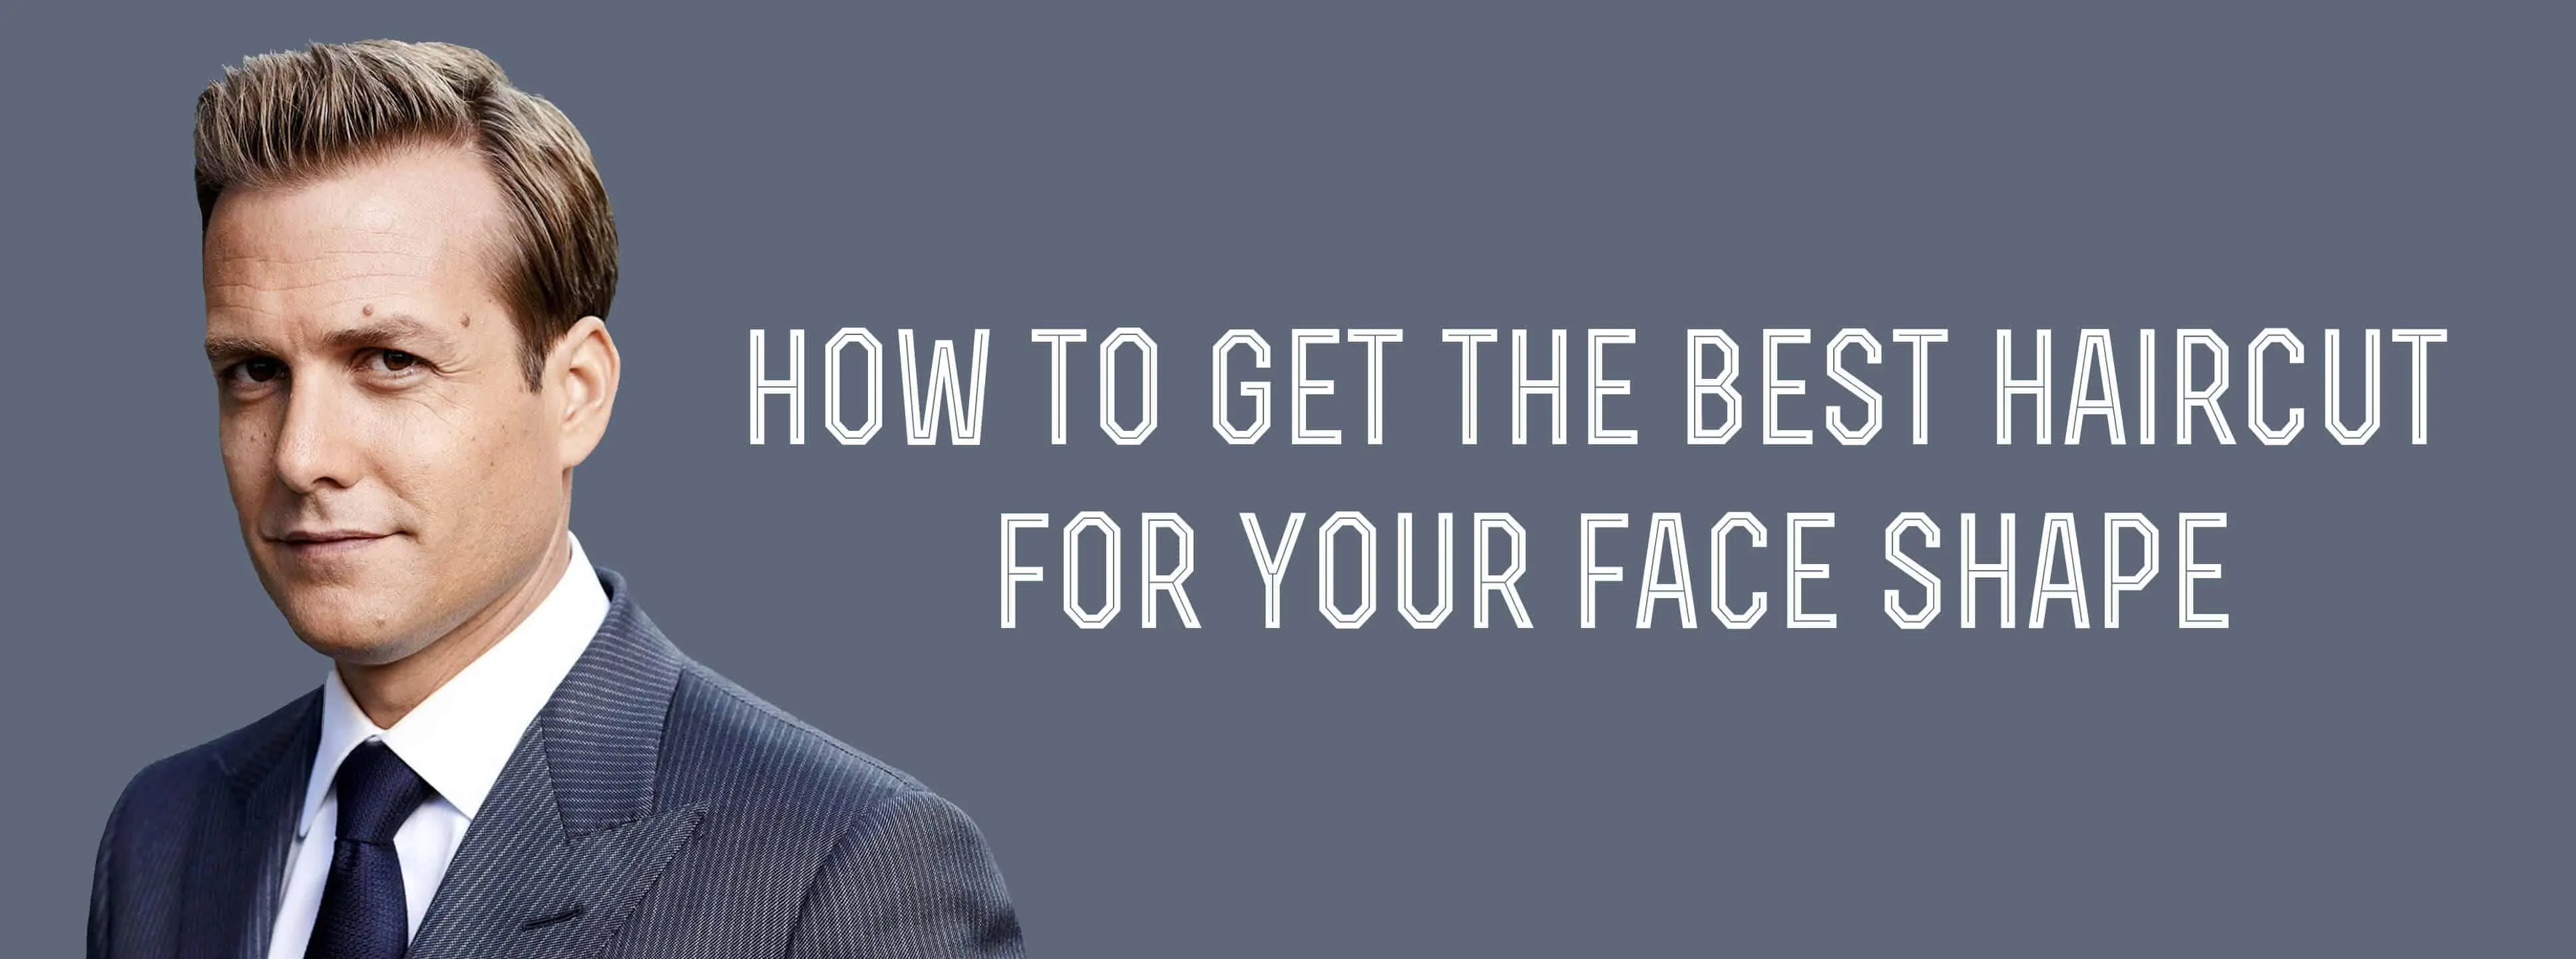 How to Get The Best Haircut For Your Face Shape